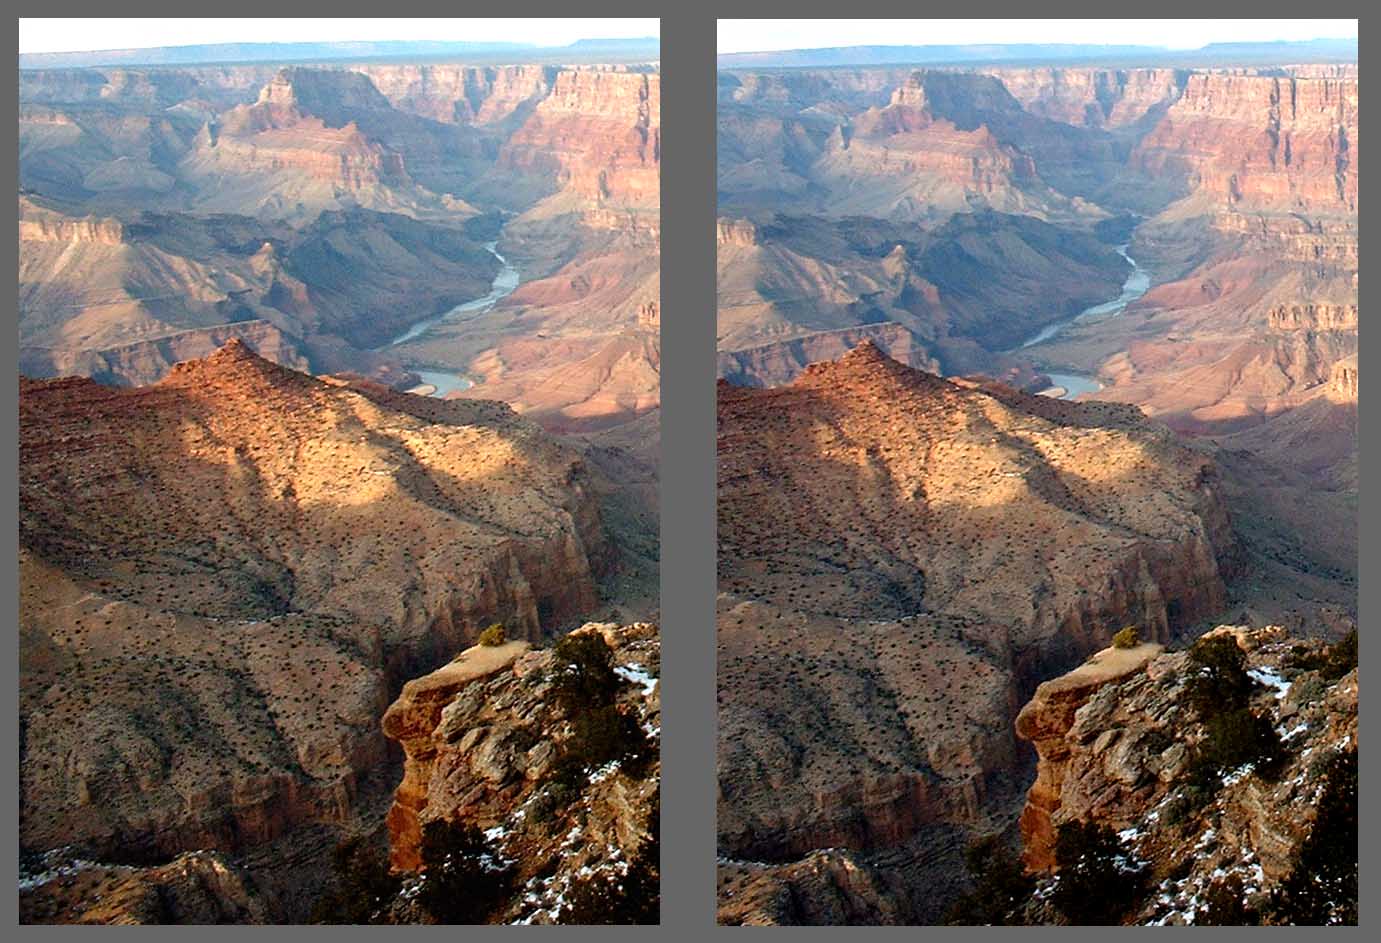 Stereo Photo - Grand Canyon View H - Cross-eyed viewing method